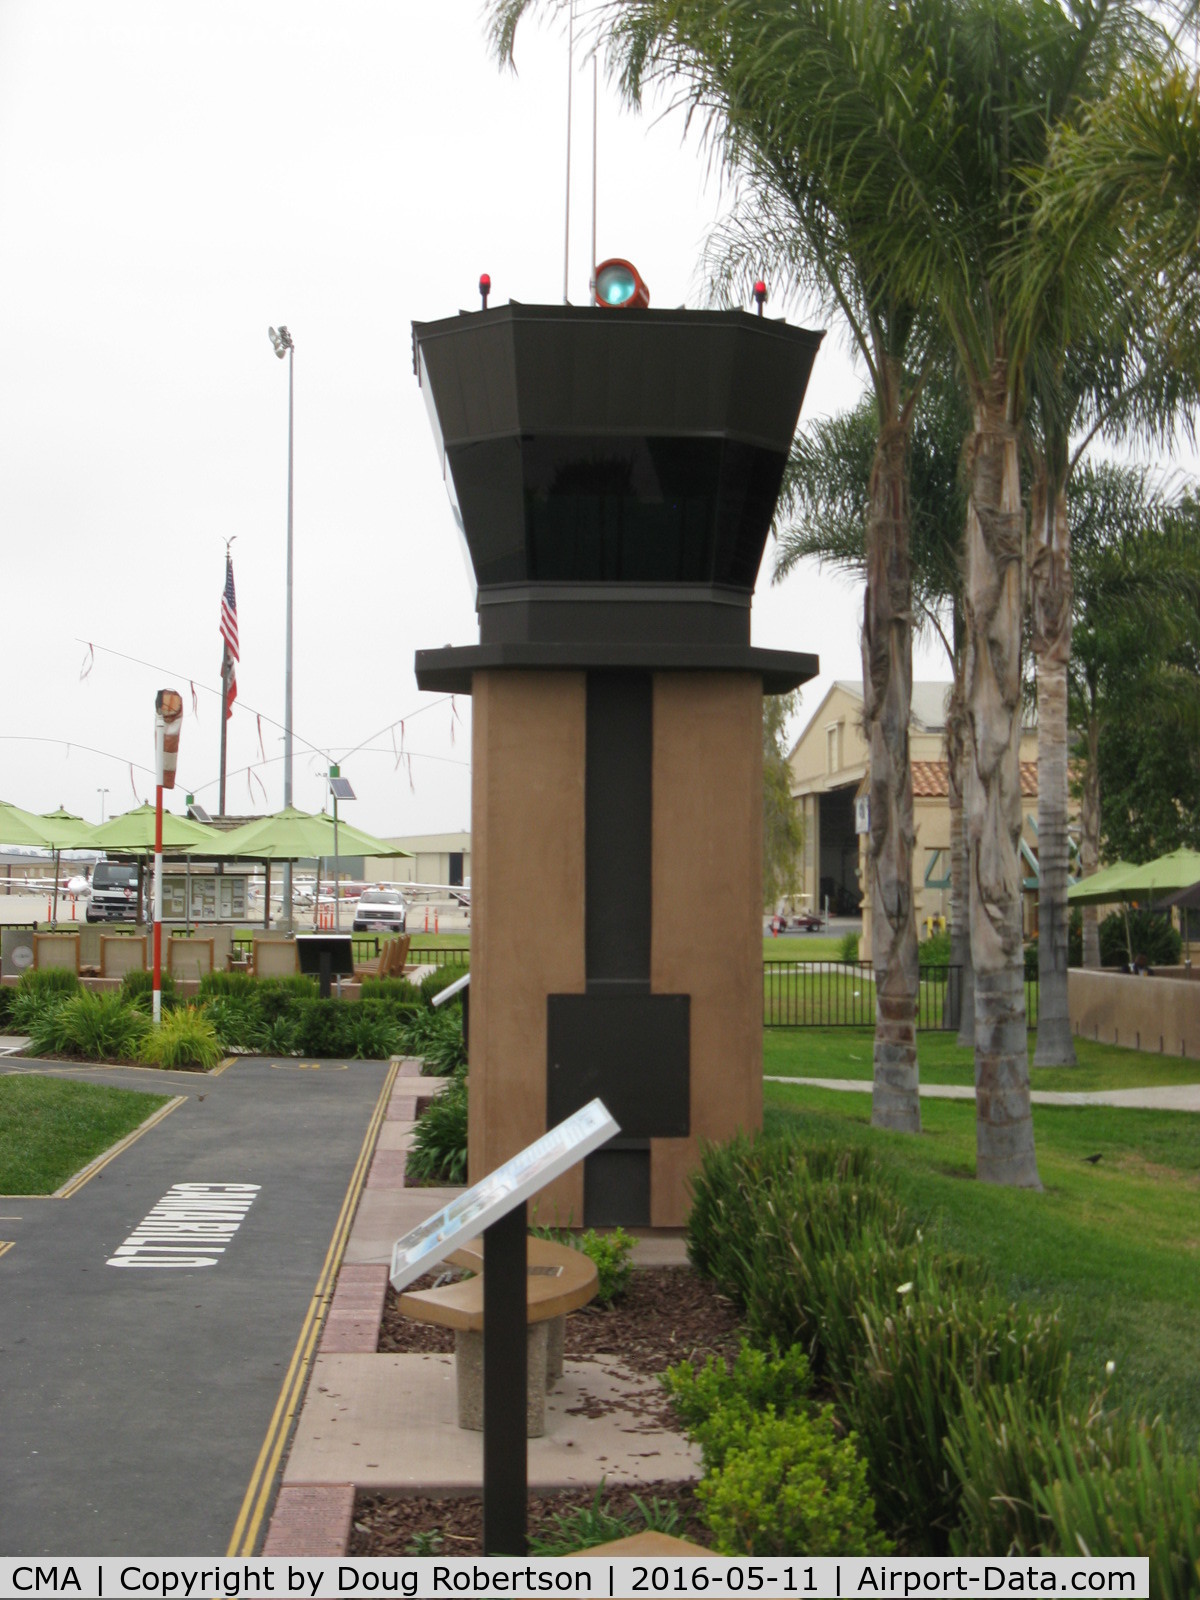 Camarillo Airport (CMA) - Miniature CMA Control Tower with civil rotating beacon (white-green) and real-time audio from Tower ATC and aircraft pilots at CMA Aircraft Public View Park. Listen up here!